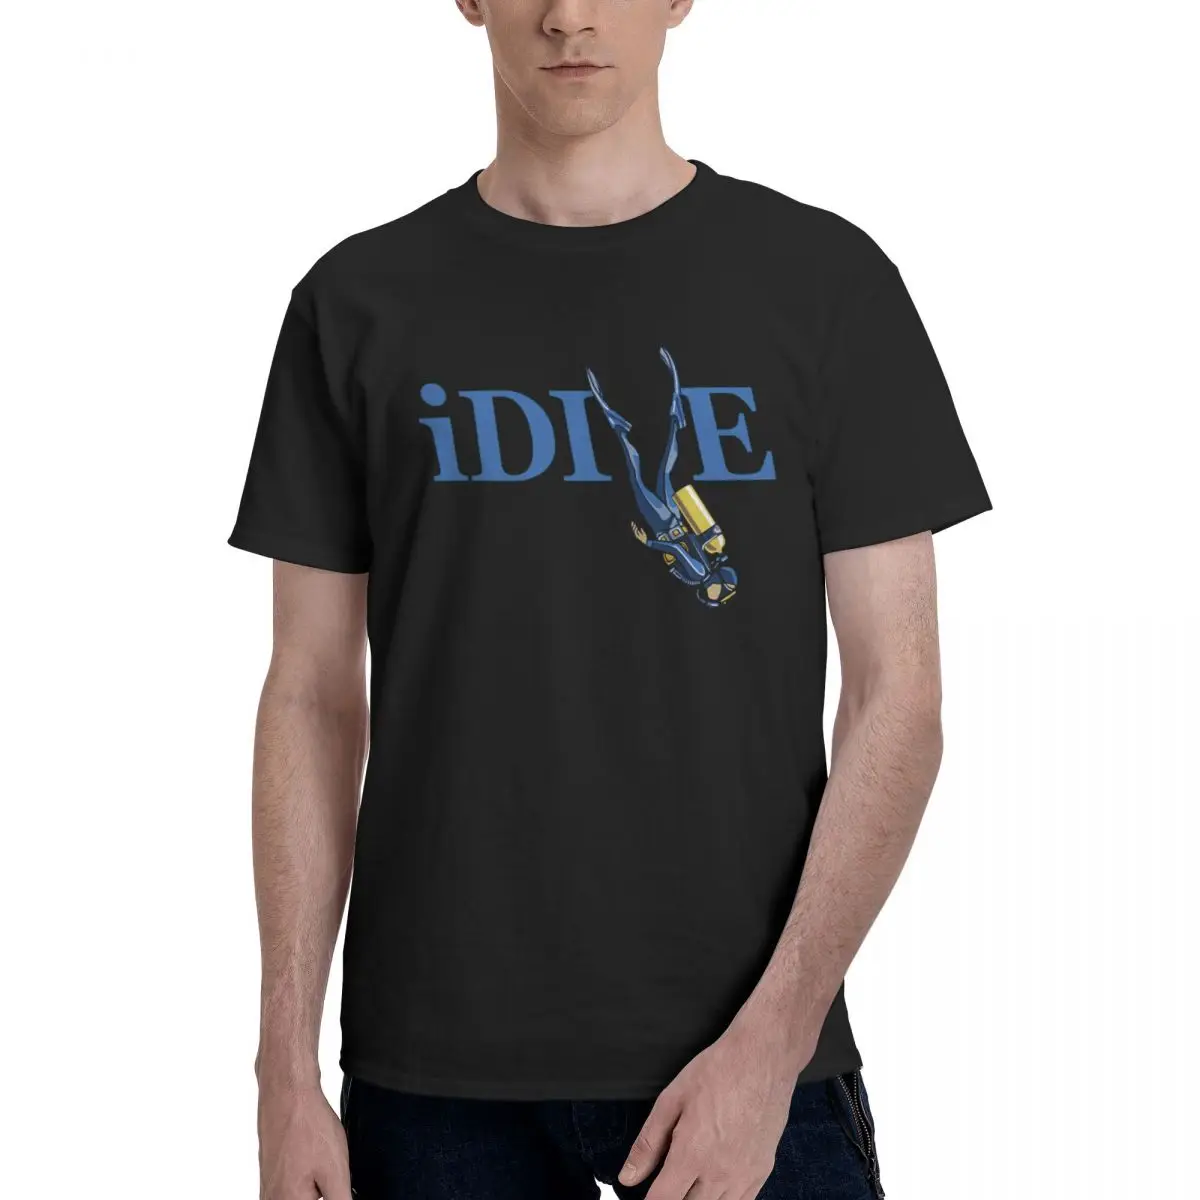 

Divin Scuba Diving 14 Adult T-shirt Fresh T-shirts Funny Graphic Humor Graphic Top quality Leisure Eur Size